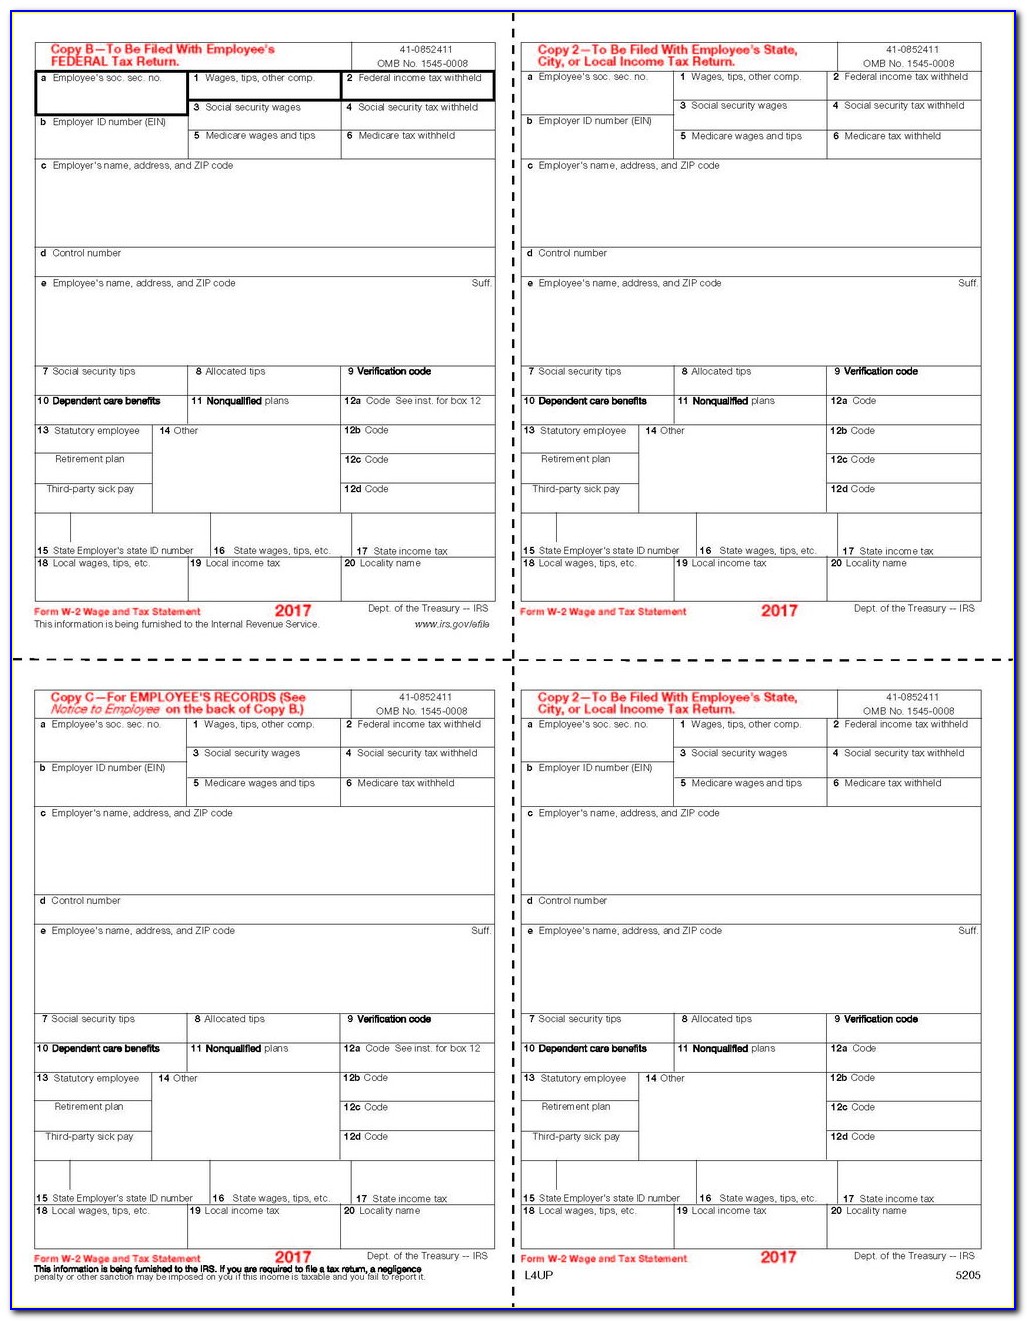 Printable 1099 Form Independent Contractor